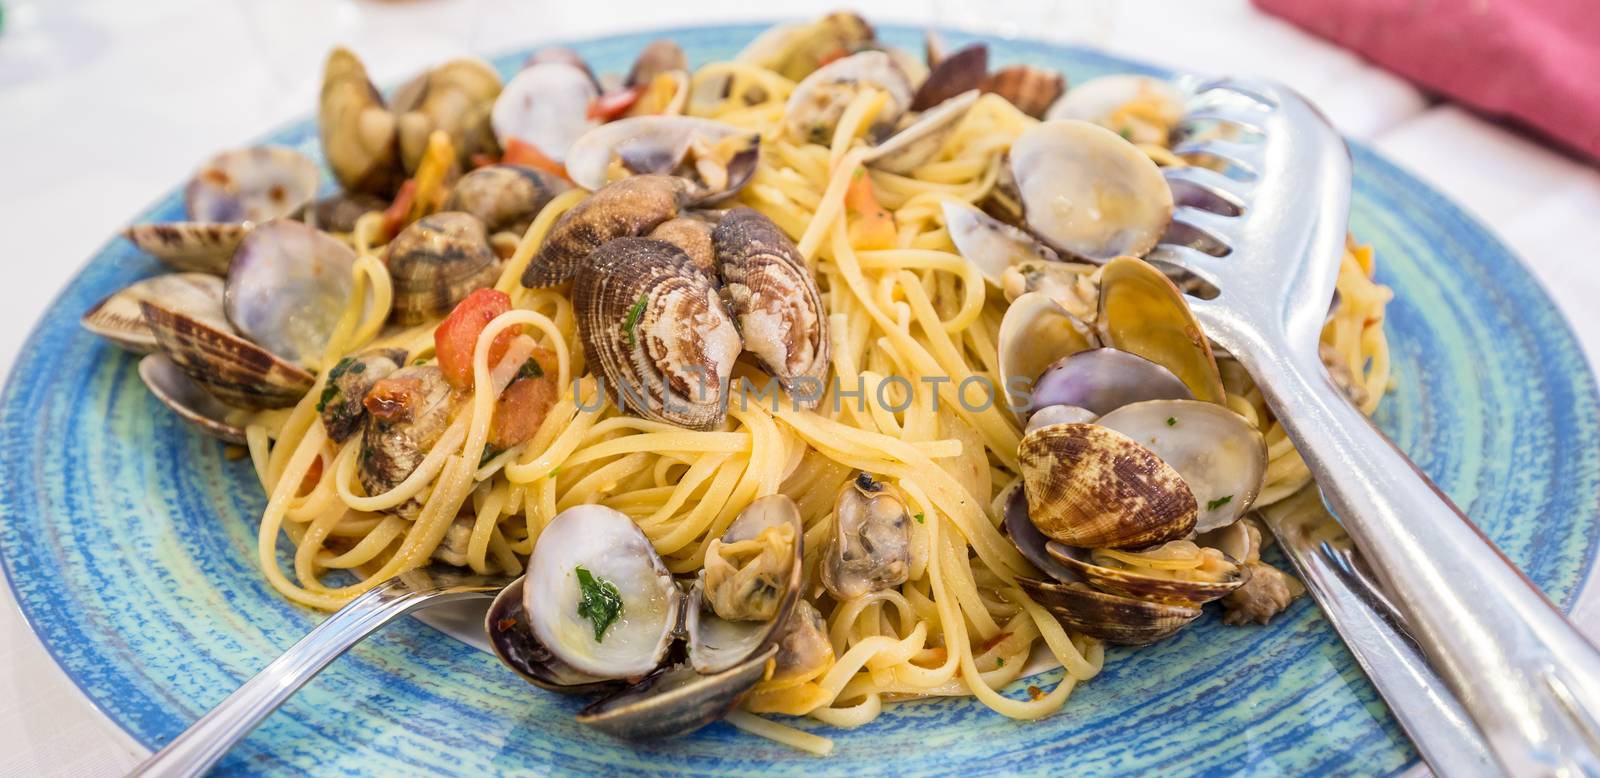 Restaurant in Naples, Italy. No photography set for this just arrived on the table Spaghetti alle vongole